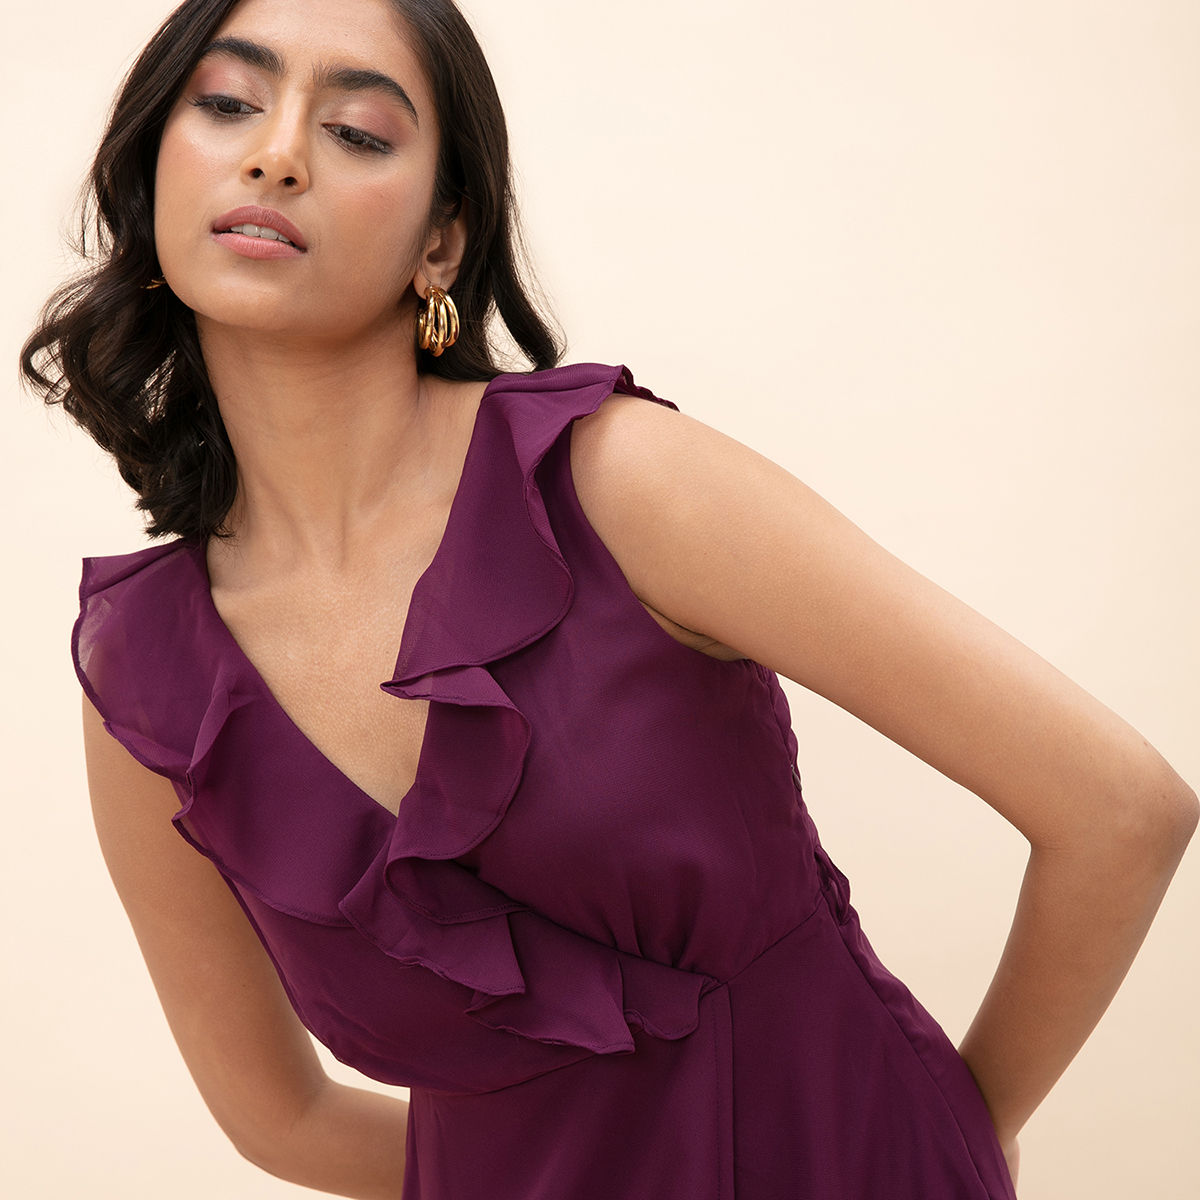 Twenty Dresses By Nykaa Fashion Nothing But Flowers Dress  Maroon Buy  Twenty Dresses By Nykaa Fashion Nothing But Flowers Dress  Maroon Online  at Best Price in India  Nykaa